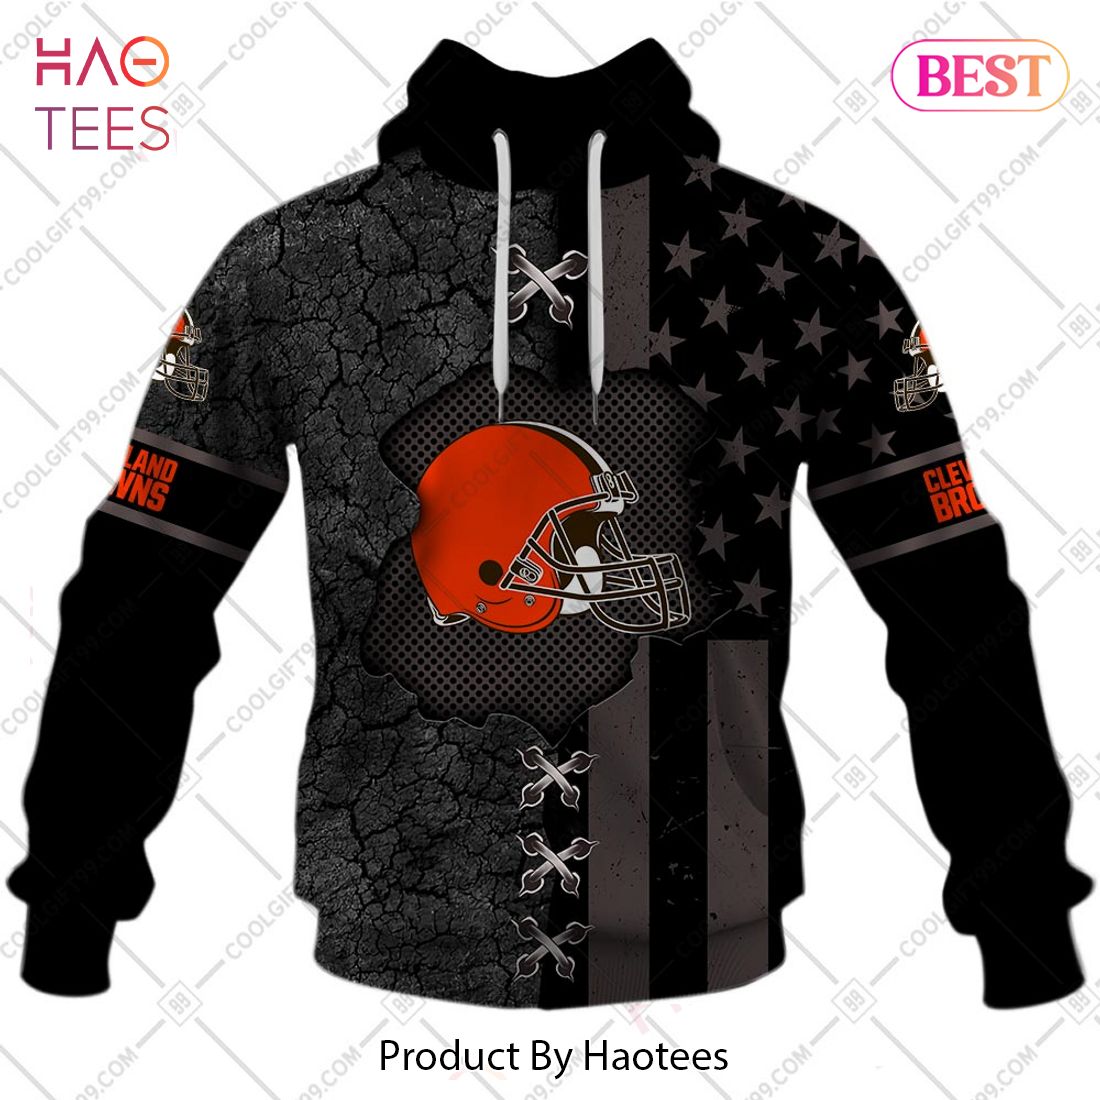 Funny Cleveland Browns Shirt 3D Cleveland Browns Gifts For Men